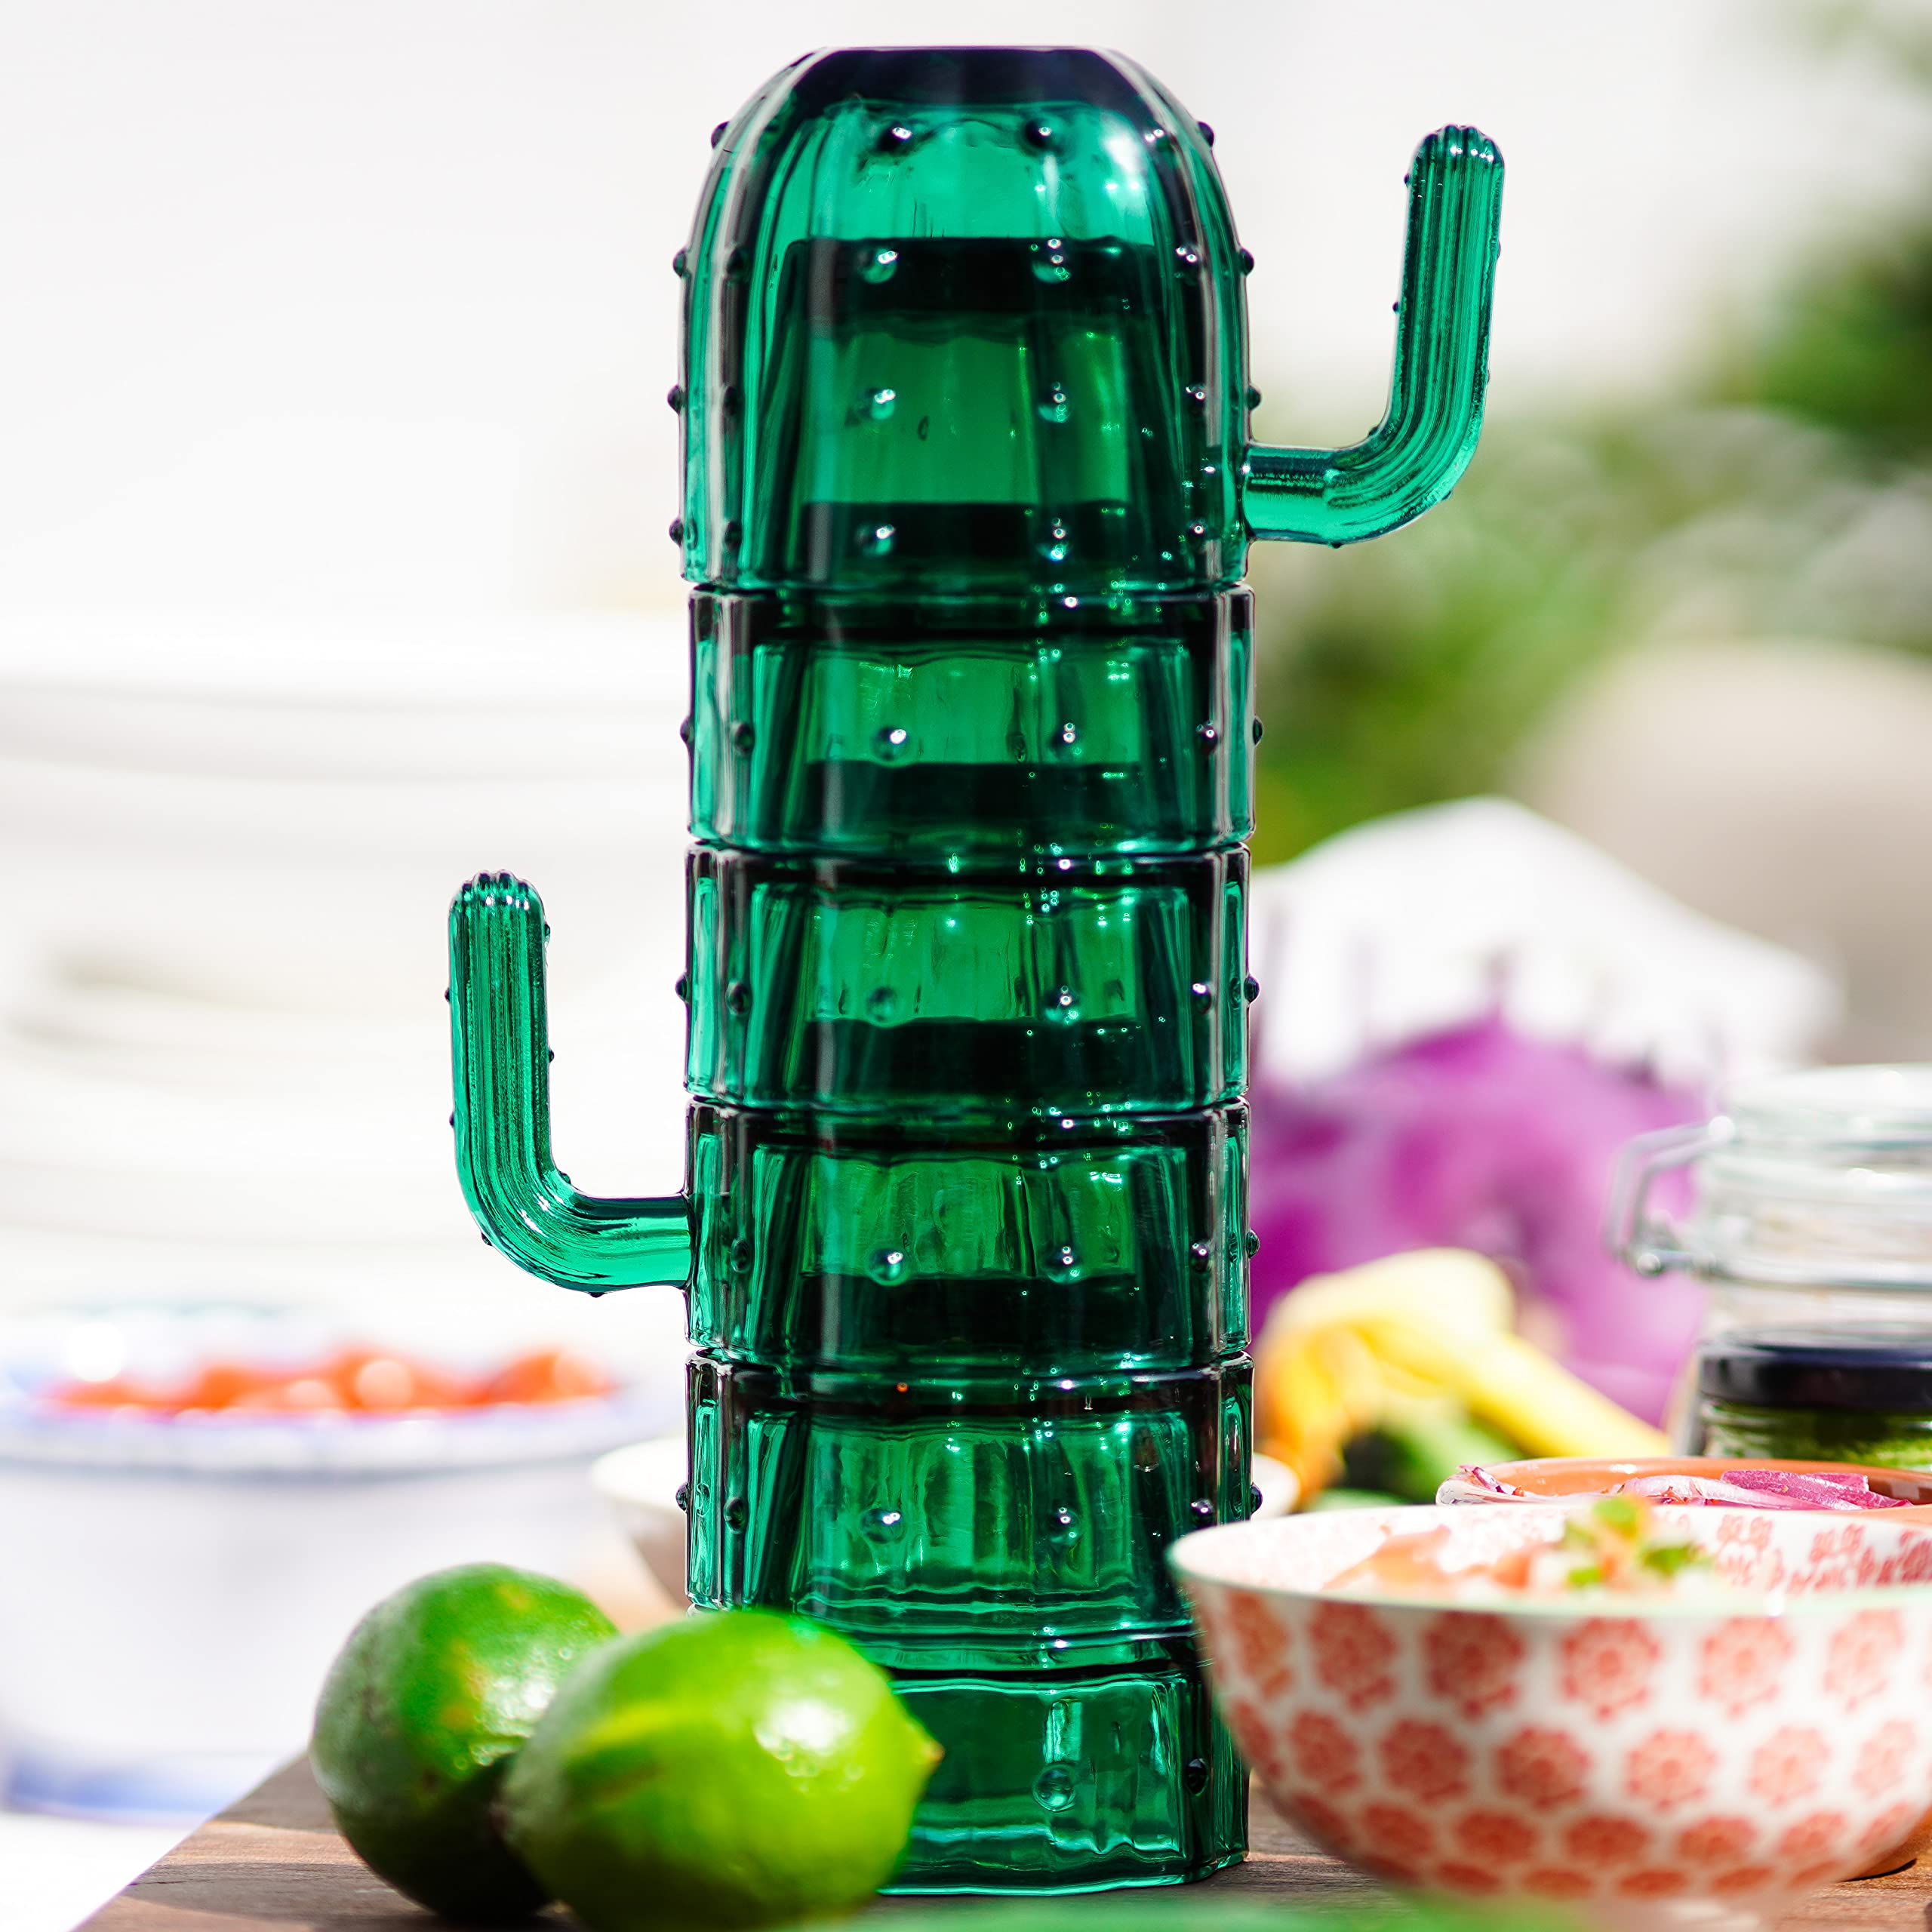 Gökotta Set of 6 | Stacking Cactus Drinking Glasses | Handmade Natural Green Glass | Retro Quirky Gift Present | Dinner Party Cocktail Water Juice Coffee Mugs Cups | 6PCS 250ml